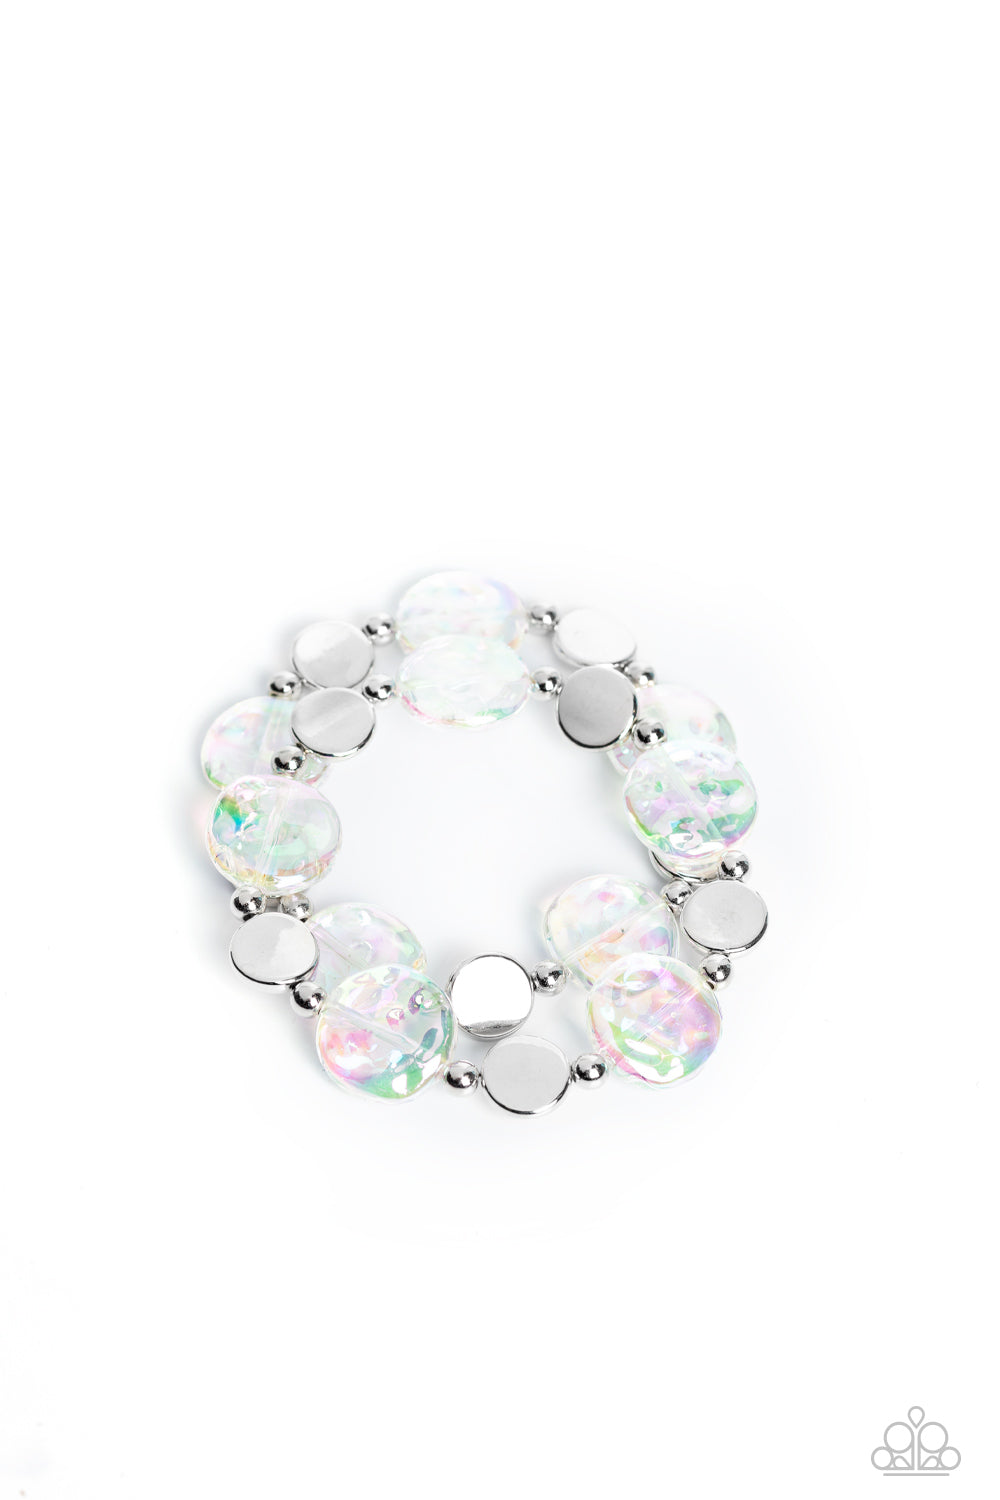 Paparazzi Accessories Discus Throw - White Shiny silver discs, studs, and asymmetrical clear discs featuring an iridescent shimmer coalesce around the wrist on elastic stretchy bands for an attention-grabbing shimmer. Due to its prismatic palette, color m